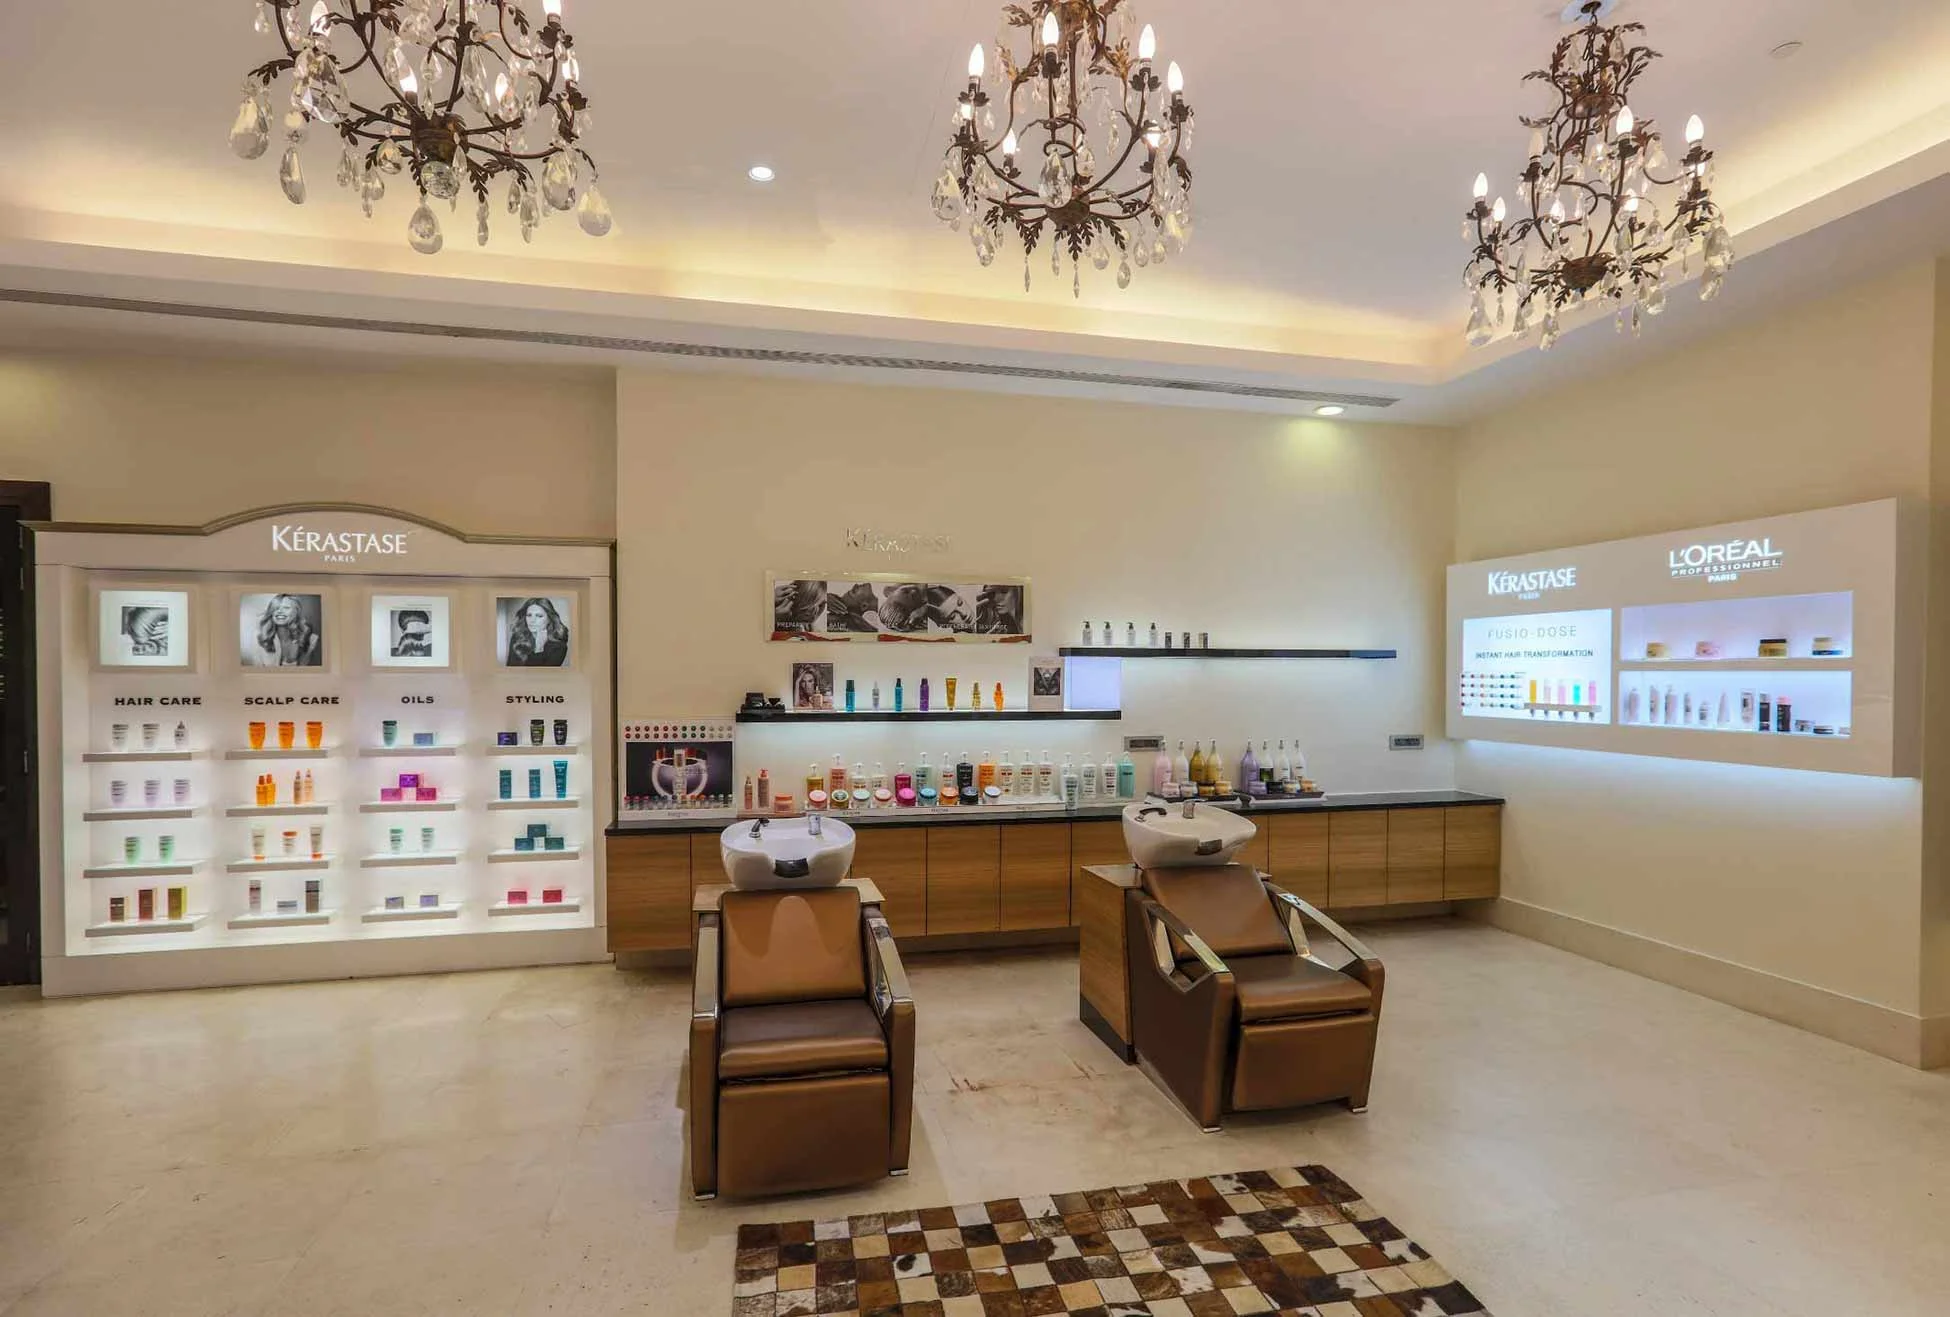 Snip salon and spa, beauty parlour in goa, best spa in goa, best salon in goa, best spa in north goa, goa beauty parlour, best spa in south goa, luxury spa in goa, best massage spa in goa, best hair salon in goa, goa beauty place, hair salon in goa, best spa in goa Calangute, best spa in Panjim Goa, good spa in goa, beauty salon in goa, best hair salon in Panjim goa, best salon in Margao, beauty parlour in Vasco, best salon in north goa, best hair salon in Margao goa, best couple spa in goa, best couple spa in north goa, best massage spa in south goa, best parlour in goa, best spa in Anjuna goa, goa salons, top 10 spa in goa, best hairdresser in goa, best luxury spa in goa, hair salon, hair cutting for women, hair salon men near me, hairdresser, goa beauty parlour, Beauty men salon, men salon parlour, Men hair cutting salon, Holiday spa treatment, Goa's best place to see, Best luxury spa, Aromatheraphy in Goa, Snip Spa, Snip Salon,